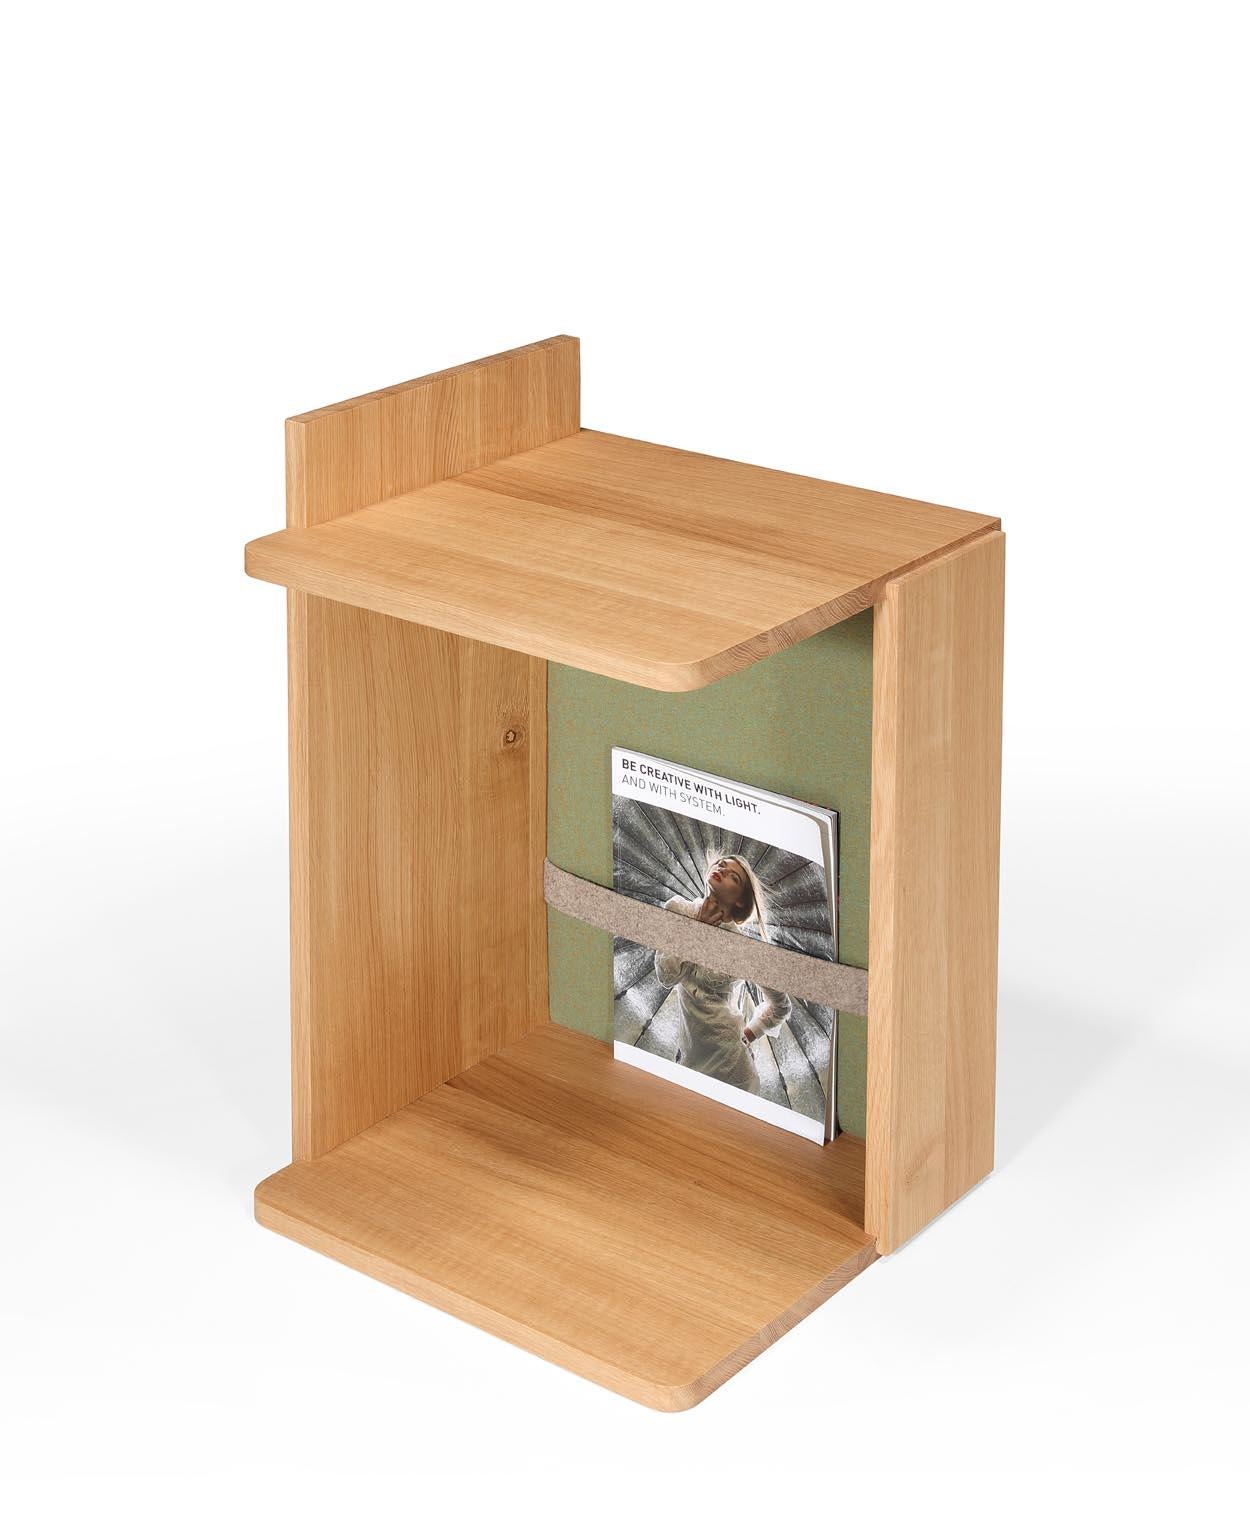 Inspired by those cherished moments of sipping coffee, indulging in a good book, and organizing magazines, the Notch Side Table effortlessly combines practicality and elegance. Its carefully crafted compartments and sleek design make it the perfect